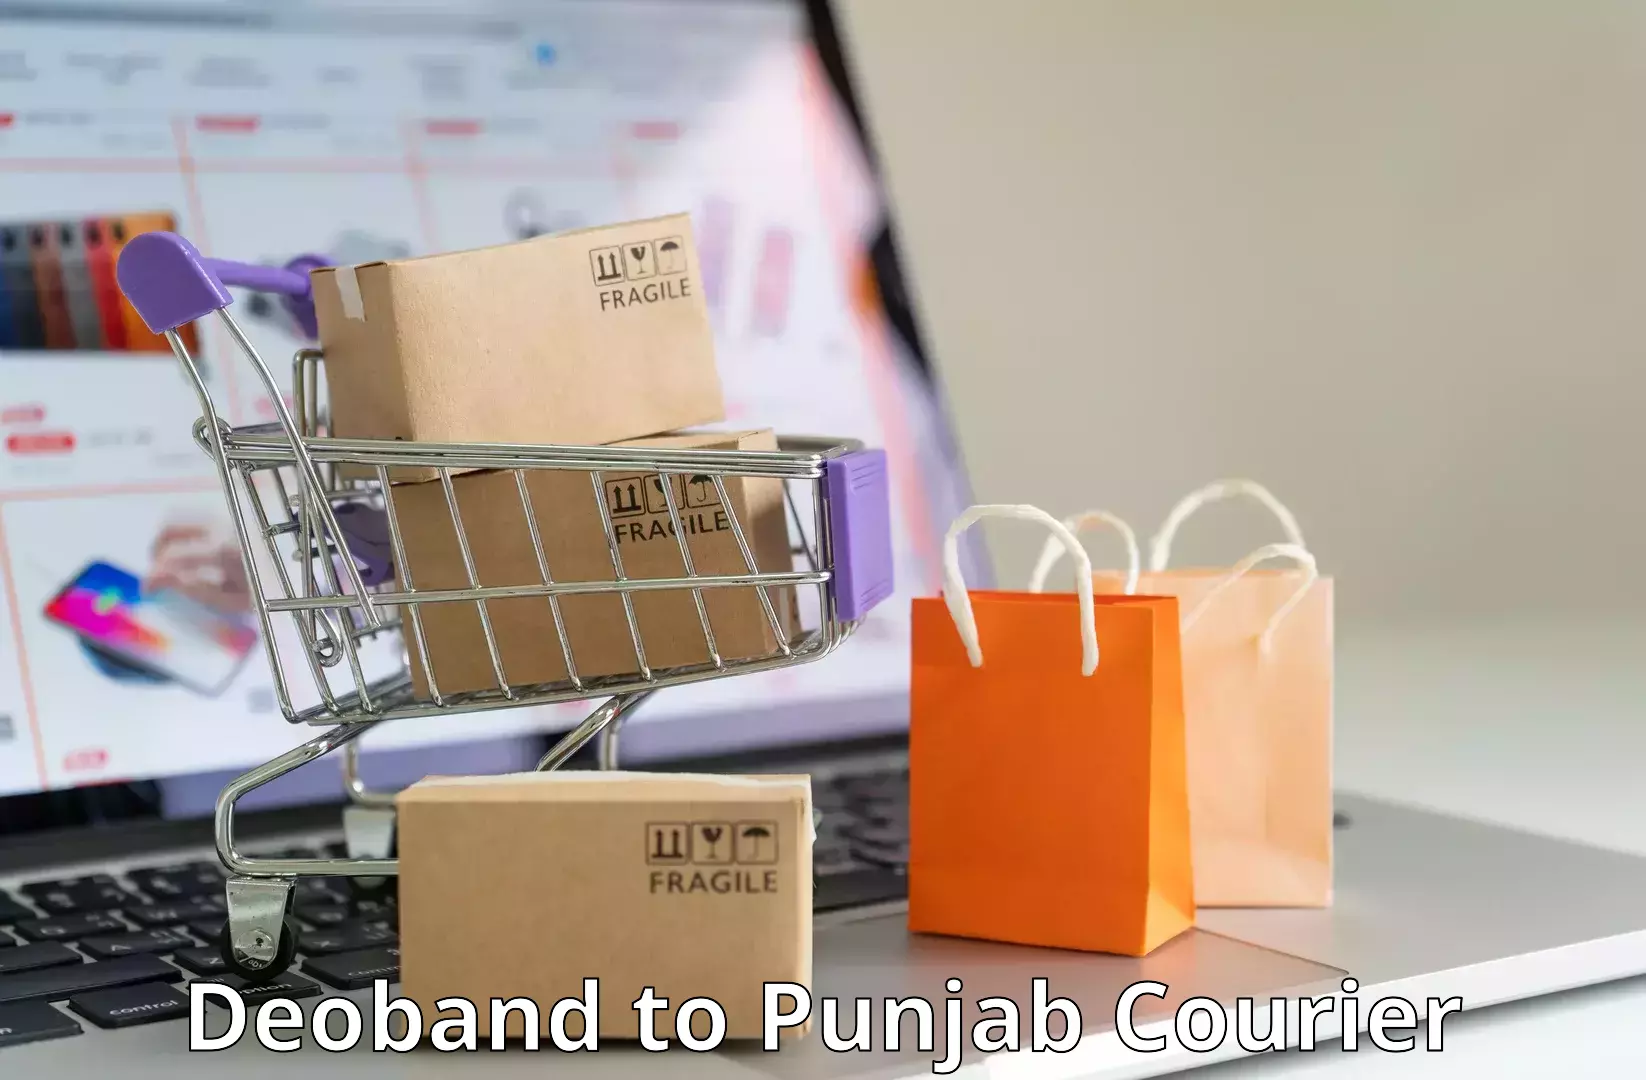 State-of-the-art courier technology Deoband to Kotkapura